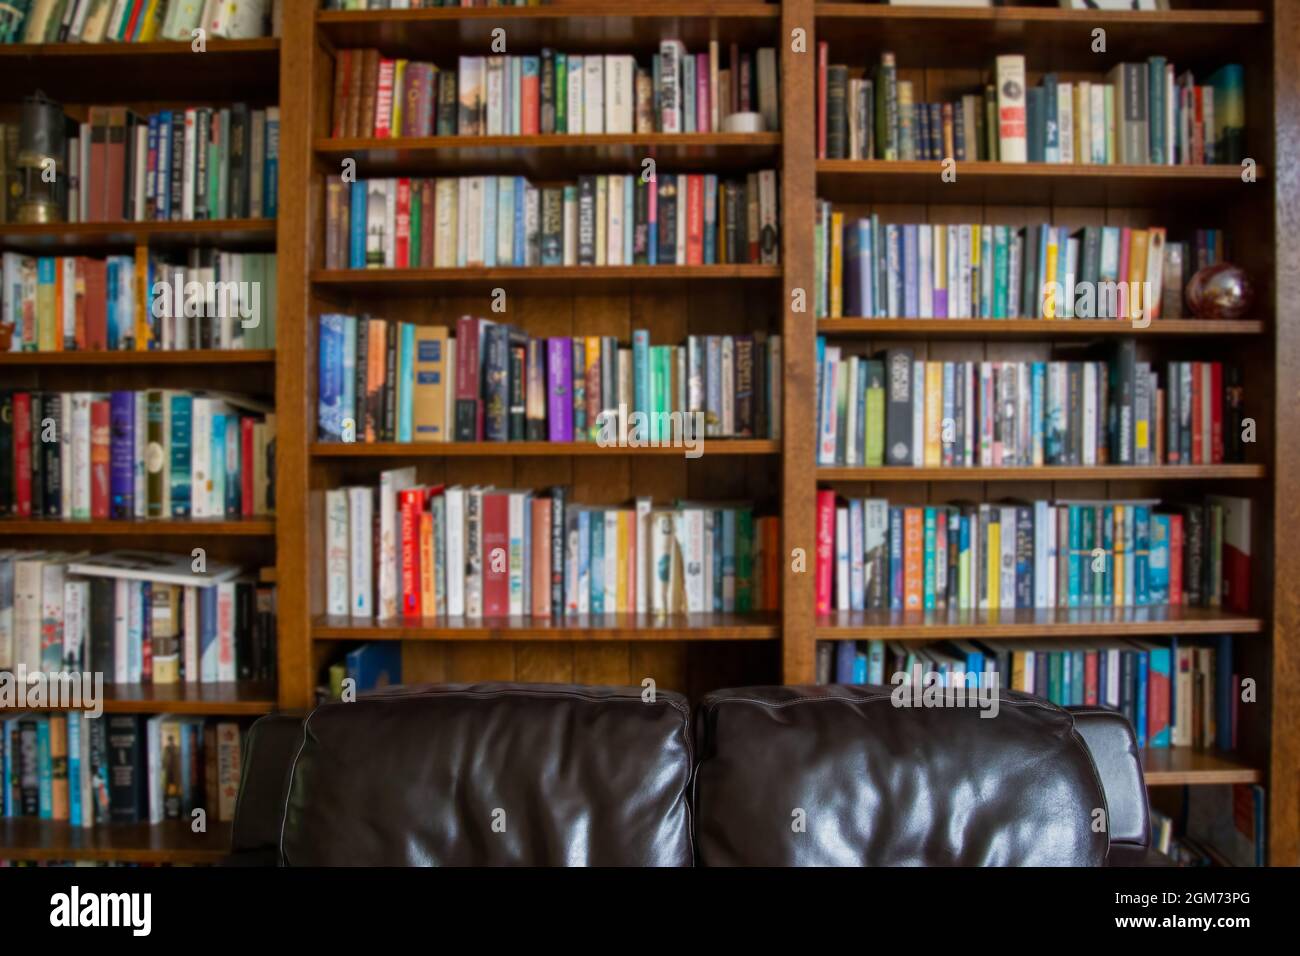 Wooden bookcase filled with blurred books, and a leather sofa in the foreground, in a UK home setting Stock Photo